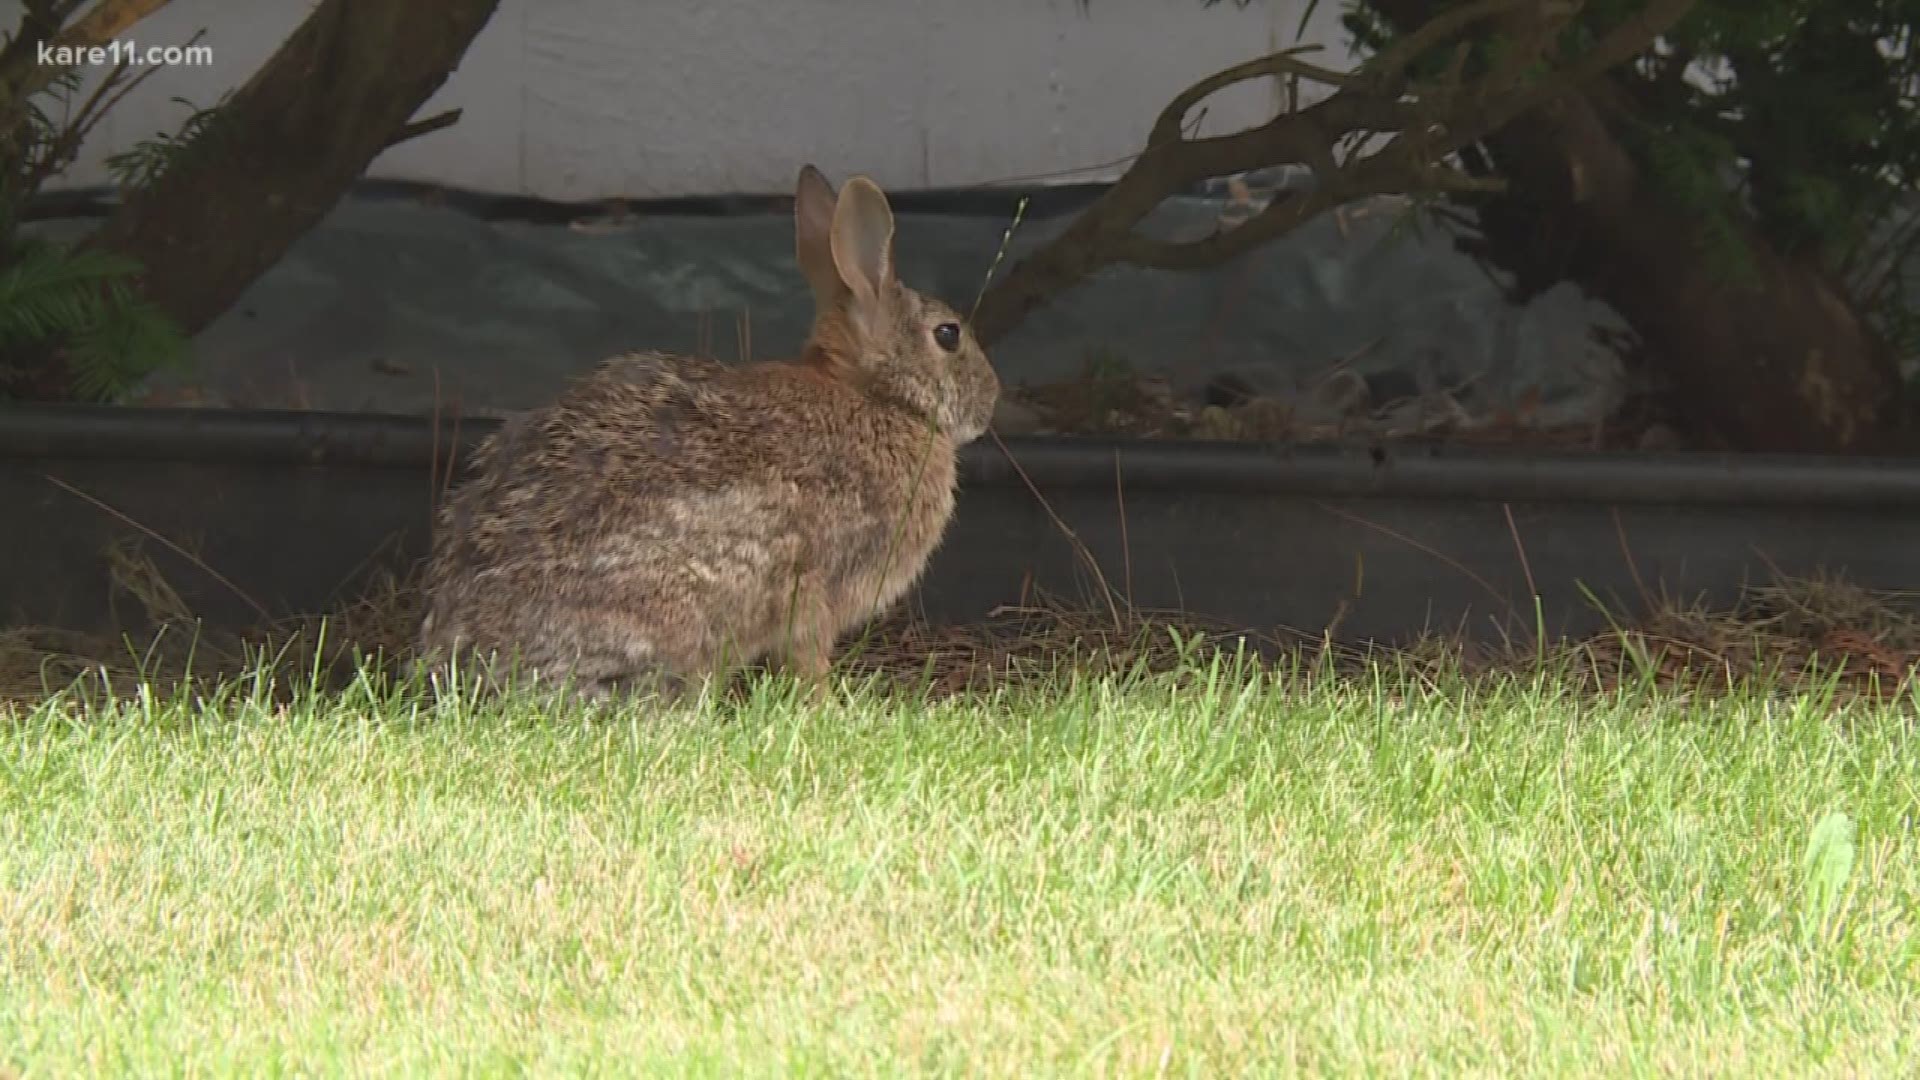 They're fluffy and cute... but those little bunnies can cause big problems in your garden. Here are tips on how to keep rabbits out of your garden and what you can do if they caused any damage.